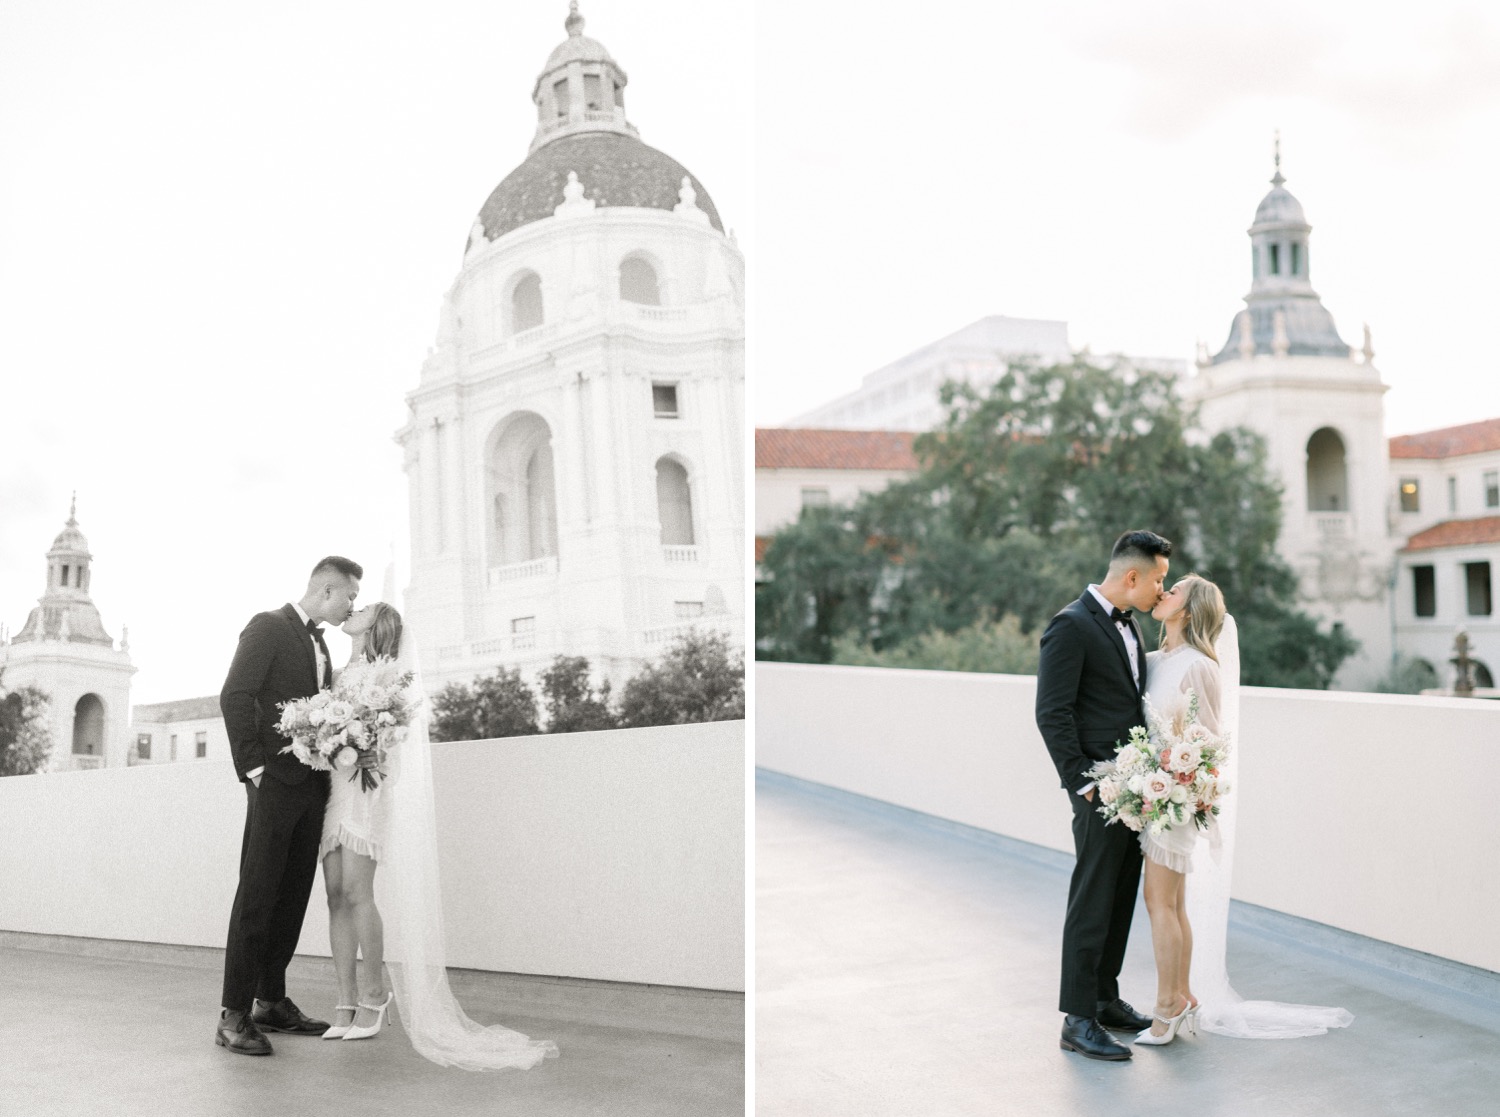 How to have a wedding ceremony at pasadena city hall, pasadena city hall wedding, pasadena wedding, wedding at pasadena city hall, courthouse wedding in pasadena, courthouse wedding at pasadena city hall, city hall wedding at the pasadena courthouse, elopement wedding at pasadena city hall, intimate wedding at pasadena city hall, intimate wedding in pasadena california, elopement wedding in pasadena, pasadena elopement, pasadena intimate wedding, intimate wedding in pasadena, wedding in LA